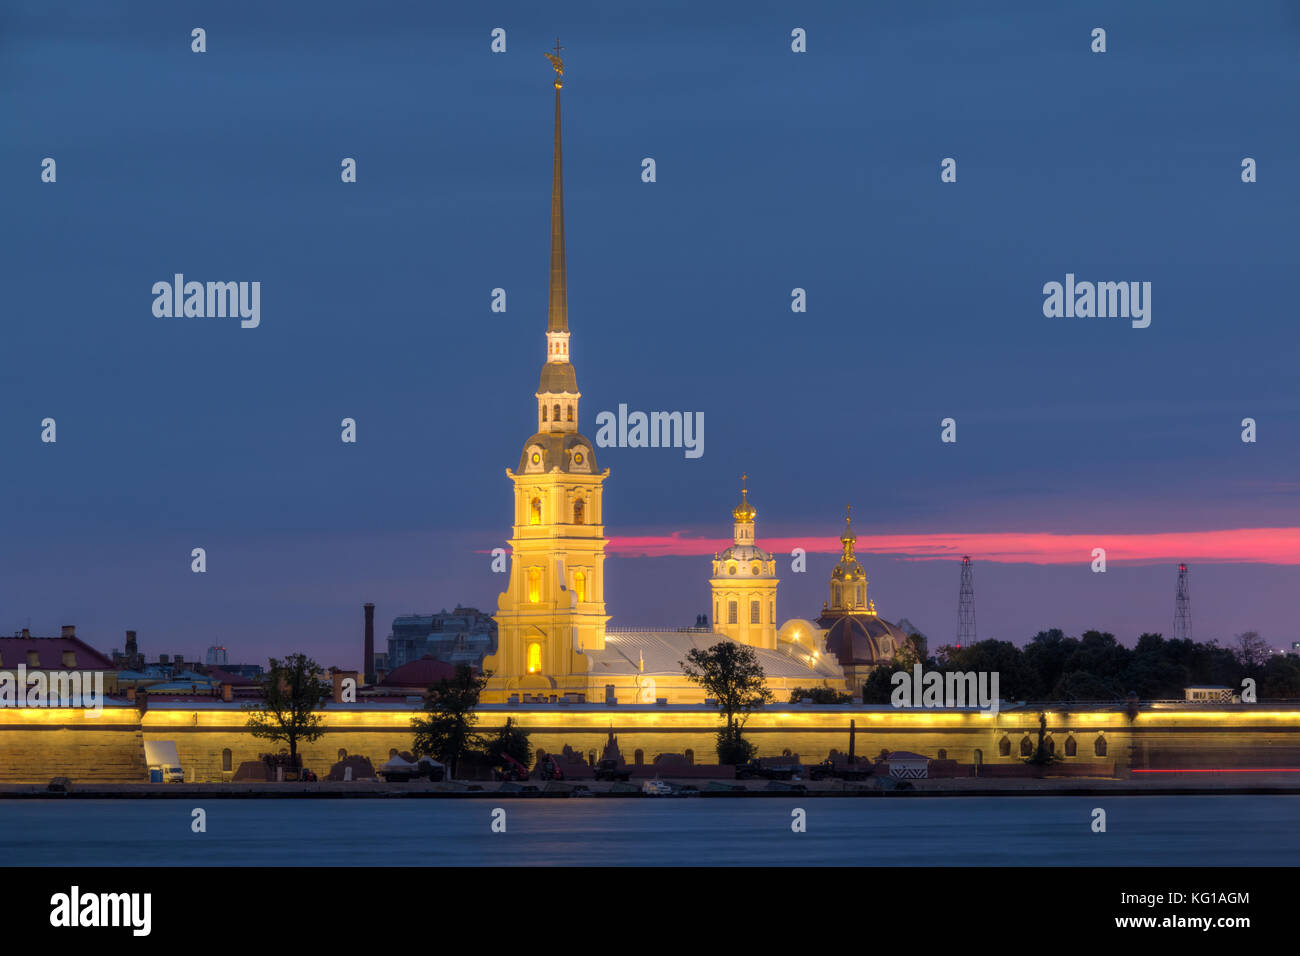 Night view on the illuminated Peter and Paul Fortress and Neva River, St. Petersburg, Russia Stock Photo